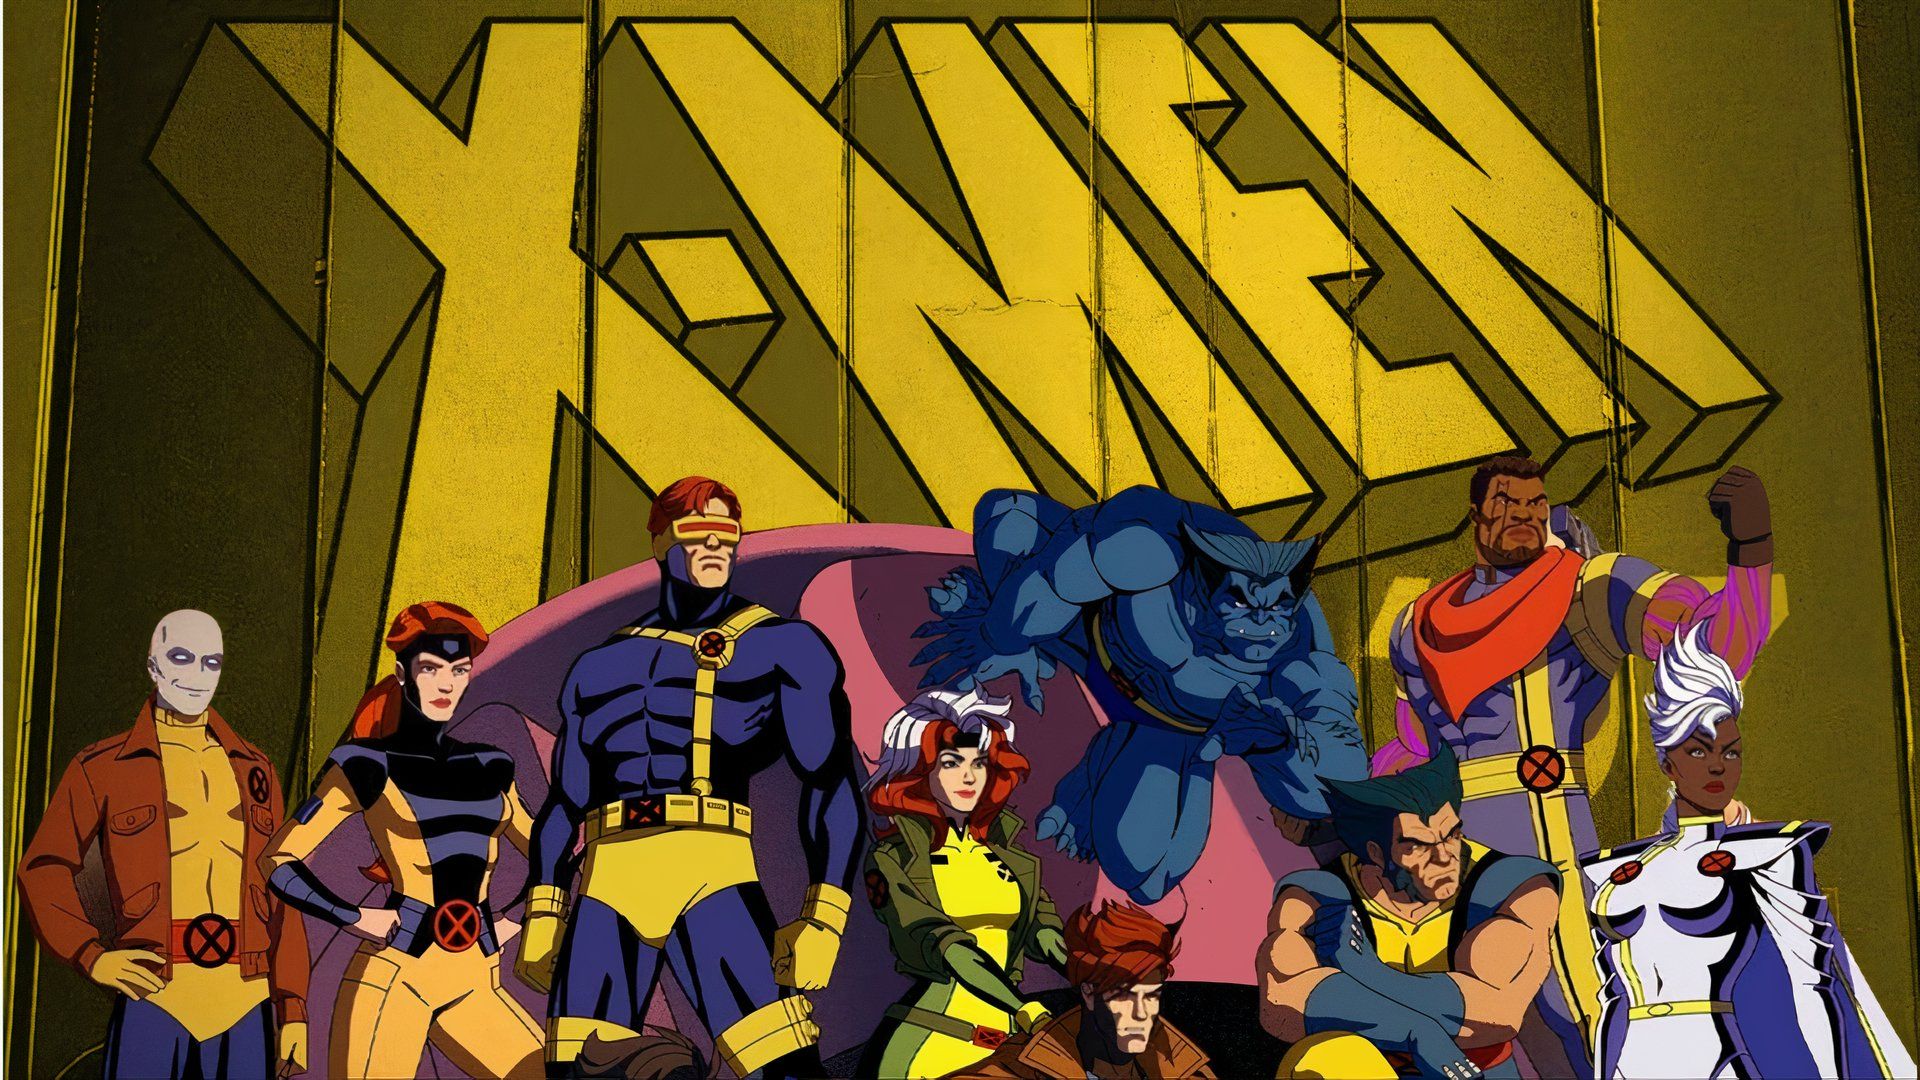 An edited image of various X-Men characters including Cyclops, Rogue, Beast, and Wolverine in X-Men '97